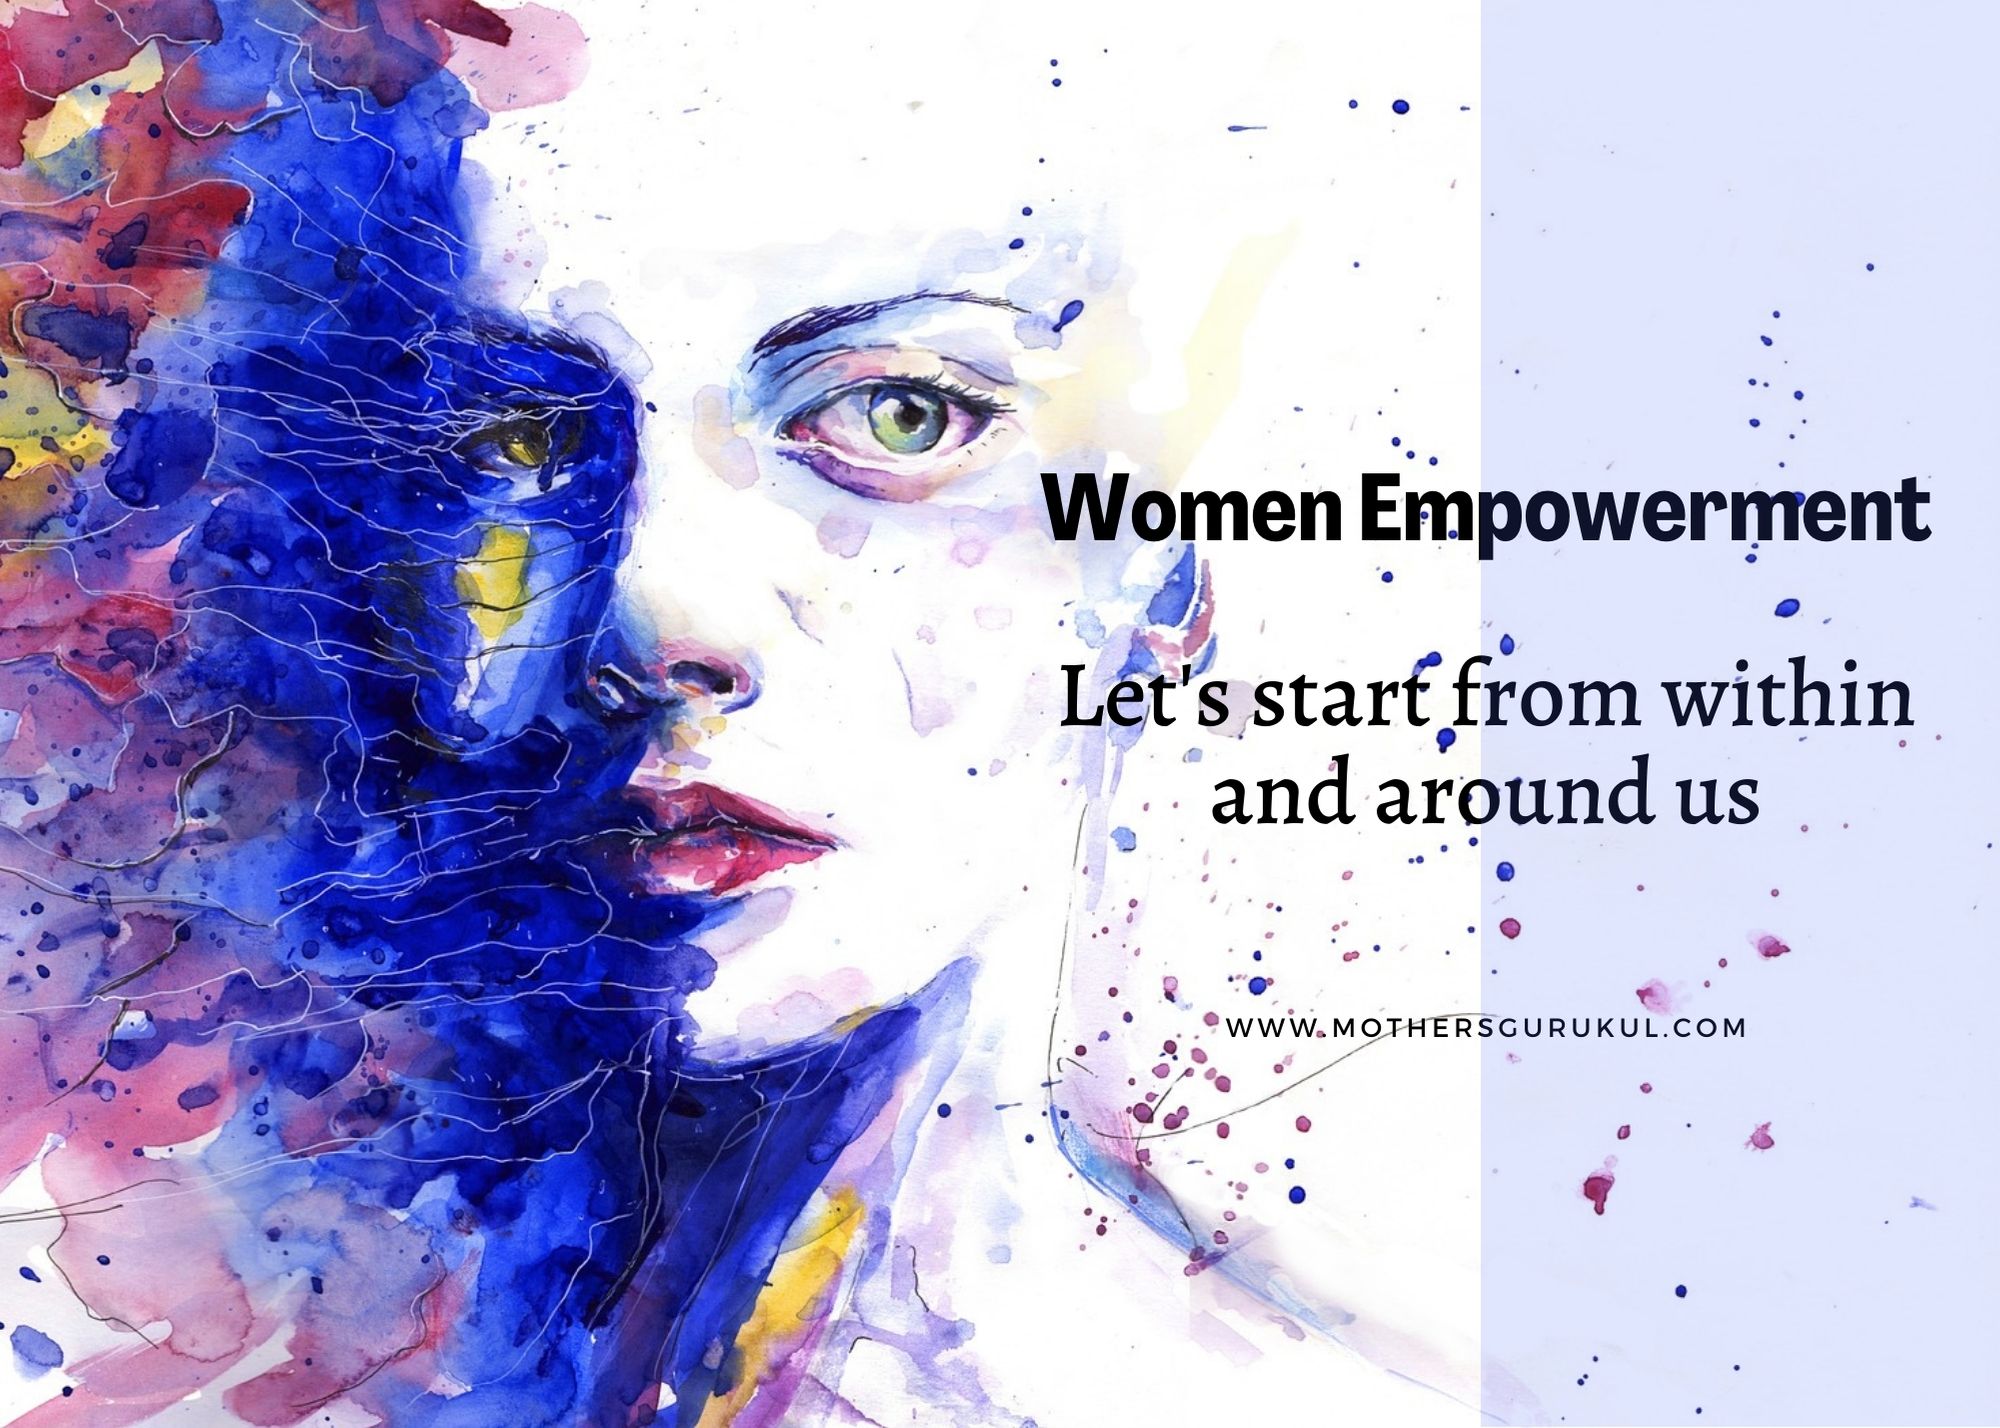 Women Empowerment: Let's start from within and around us